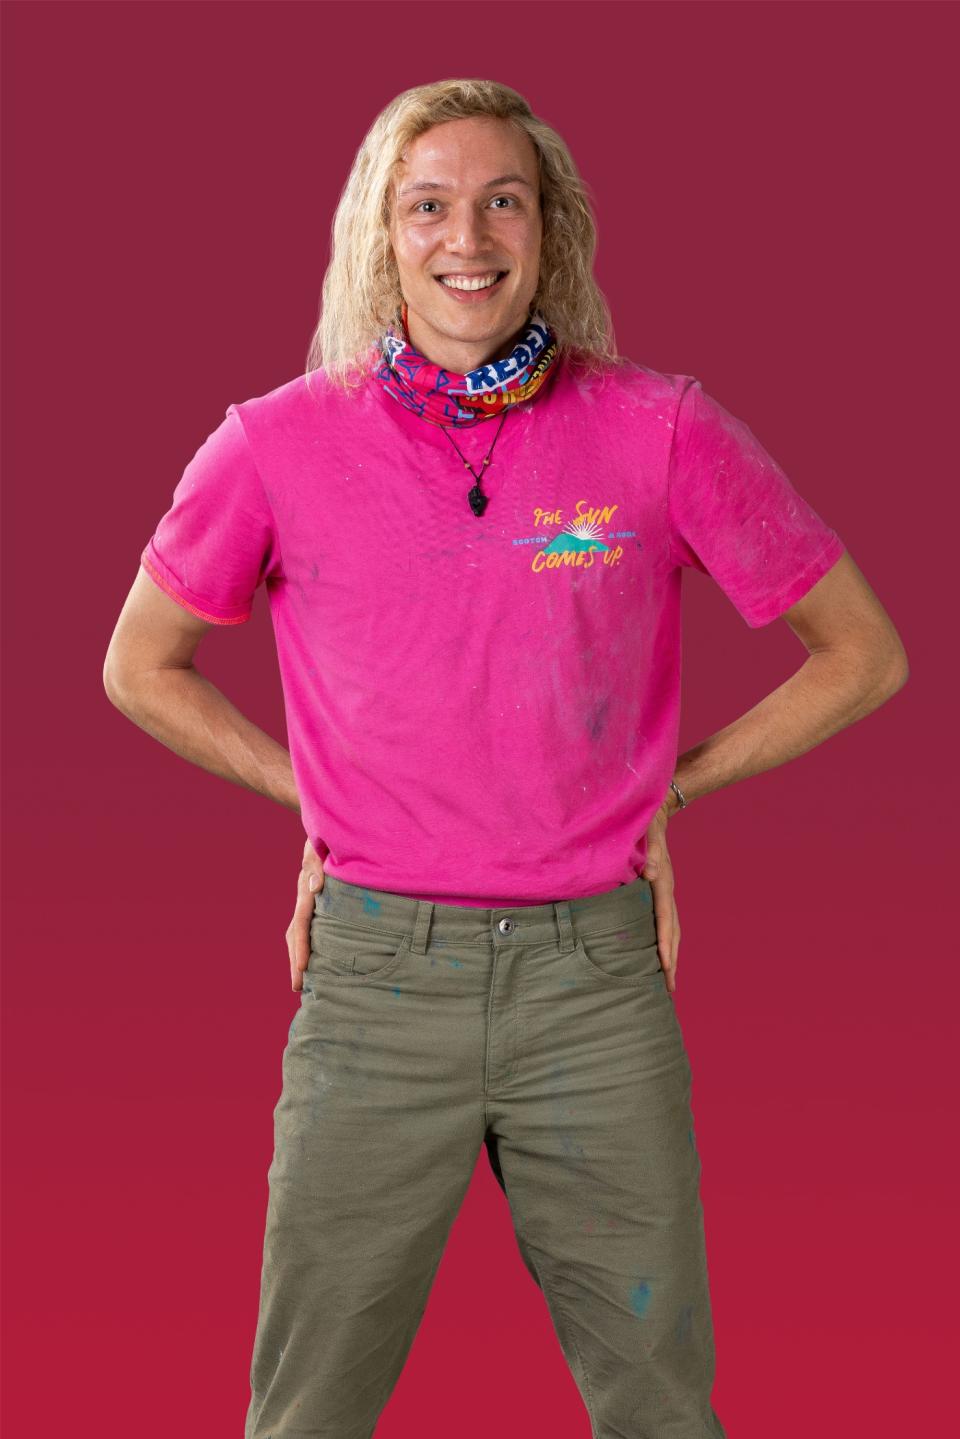 Scott wears a pink t-shirt and smiles at the camera.